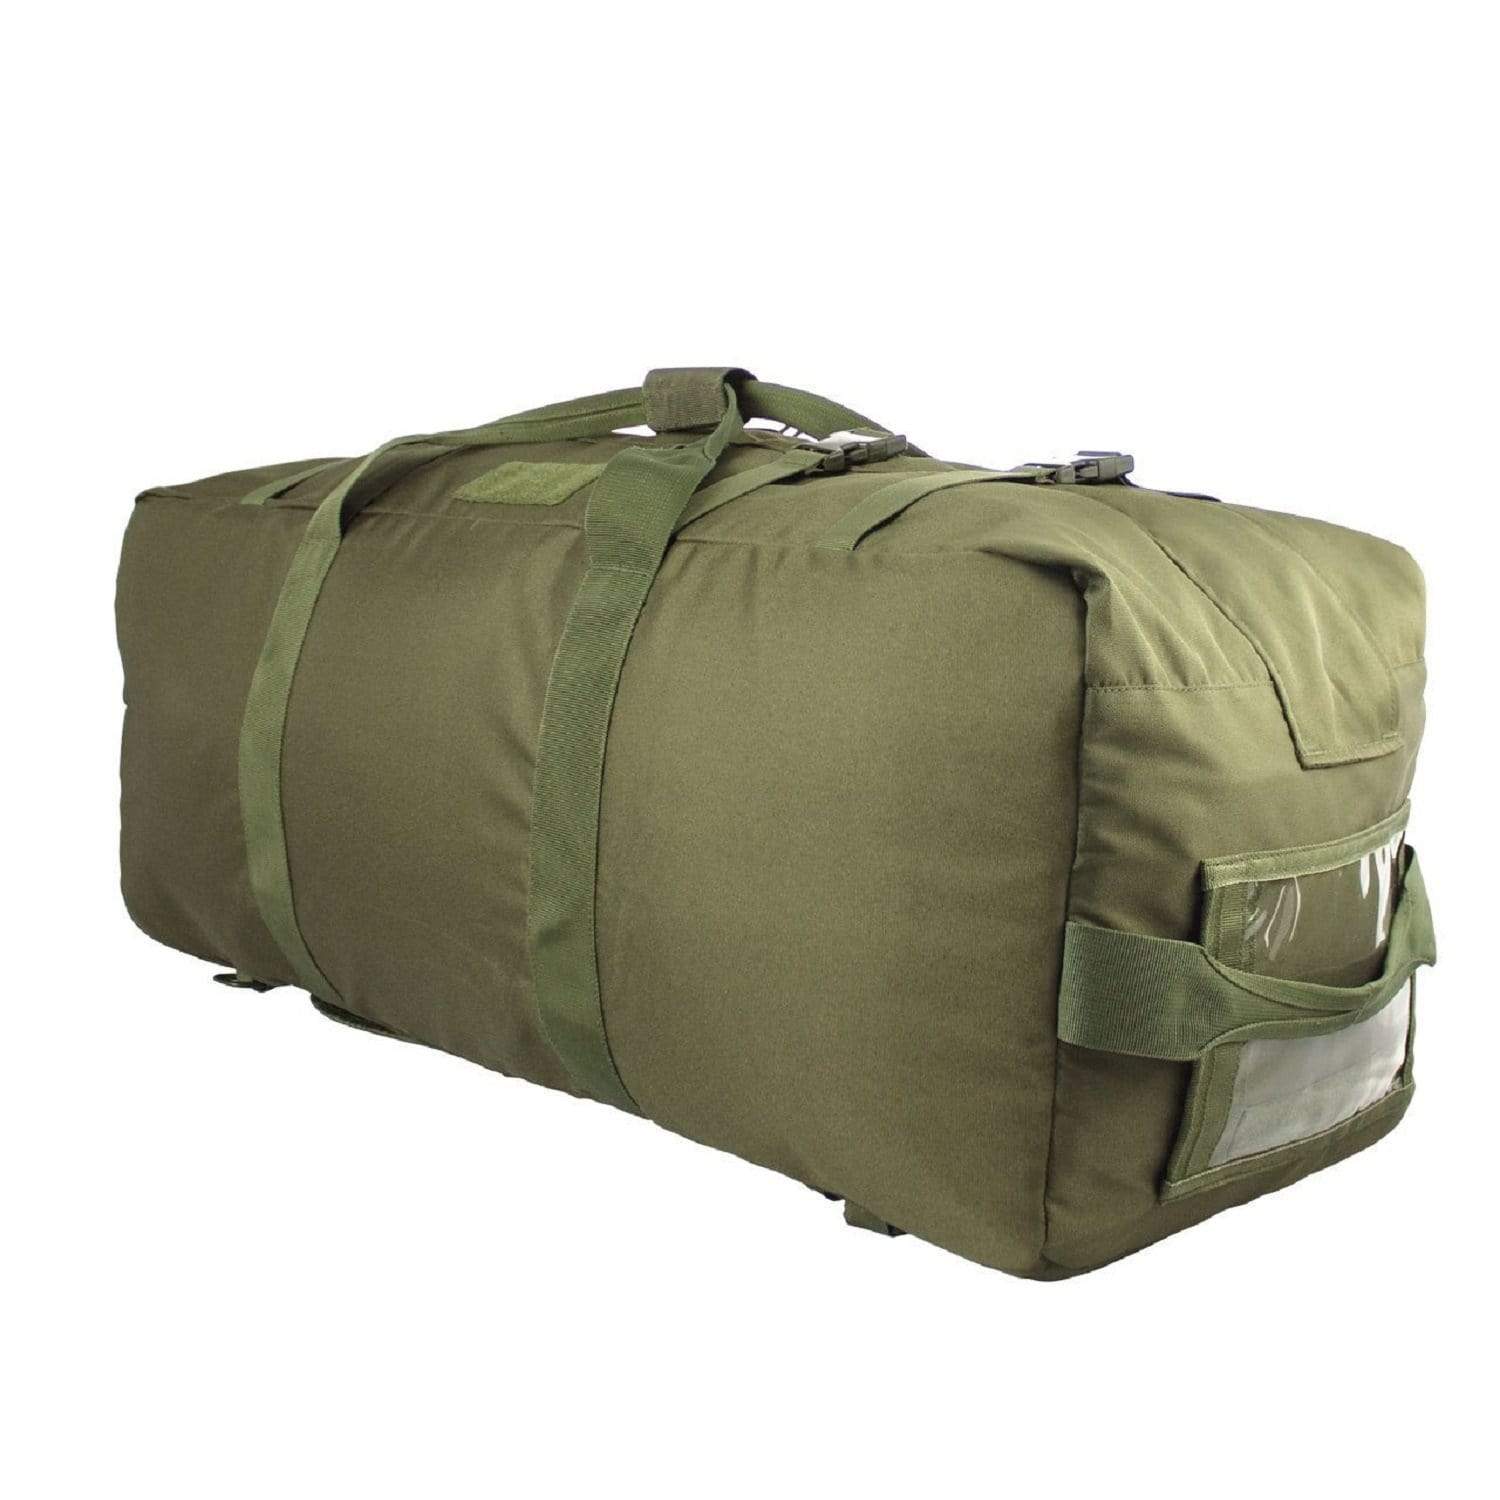 Red Rock Outdoor Gear Camping & Outdoor : Backpacks & Gearbags Red Rock Explorer Duffle Pack - Olive Drab